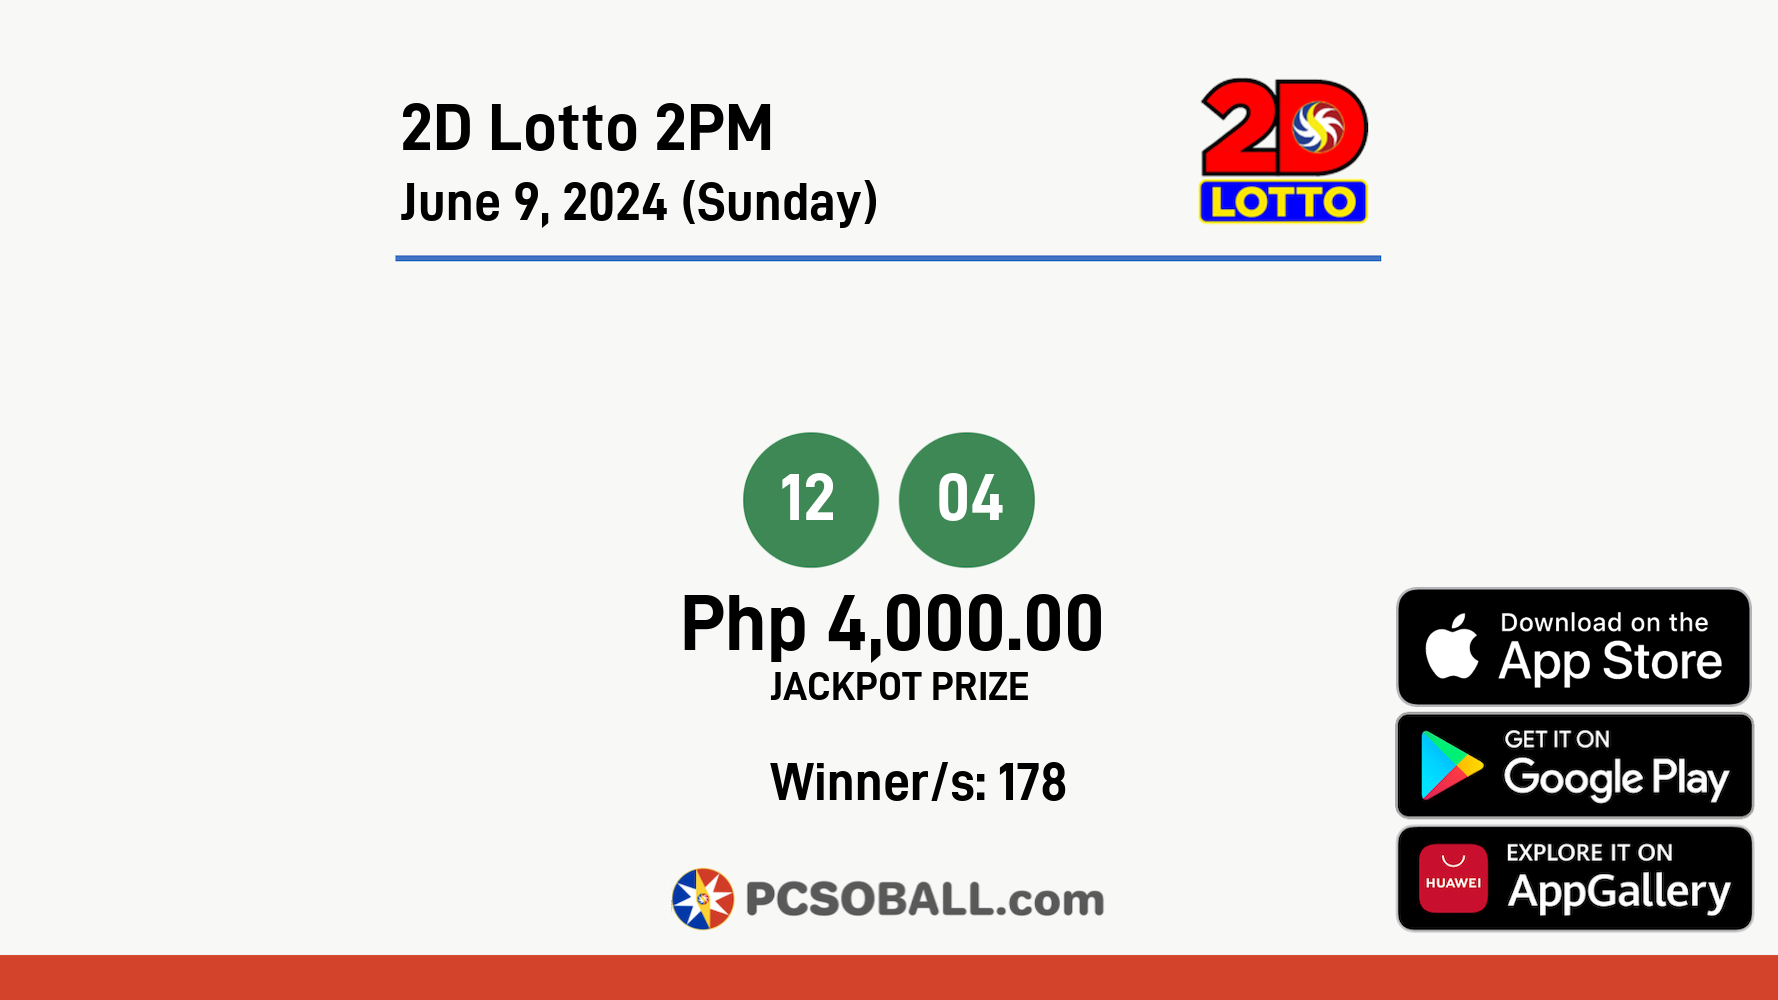 2D Lotto 2PM June 9, 2024 (Sunday) Result